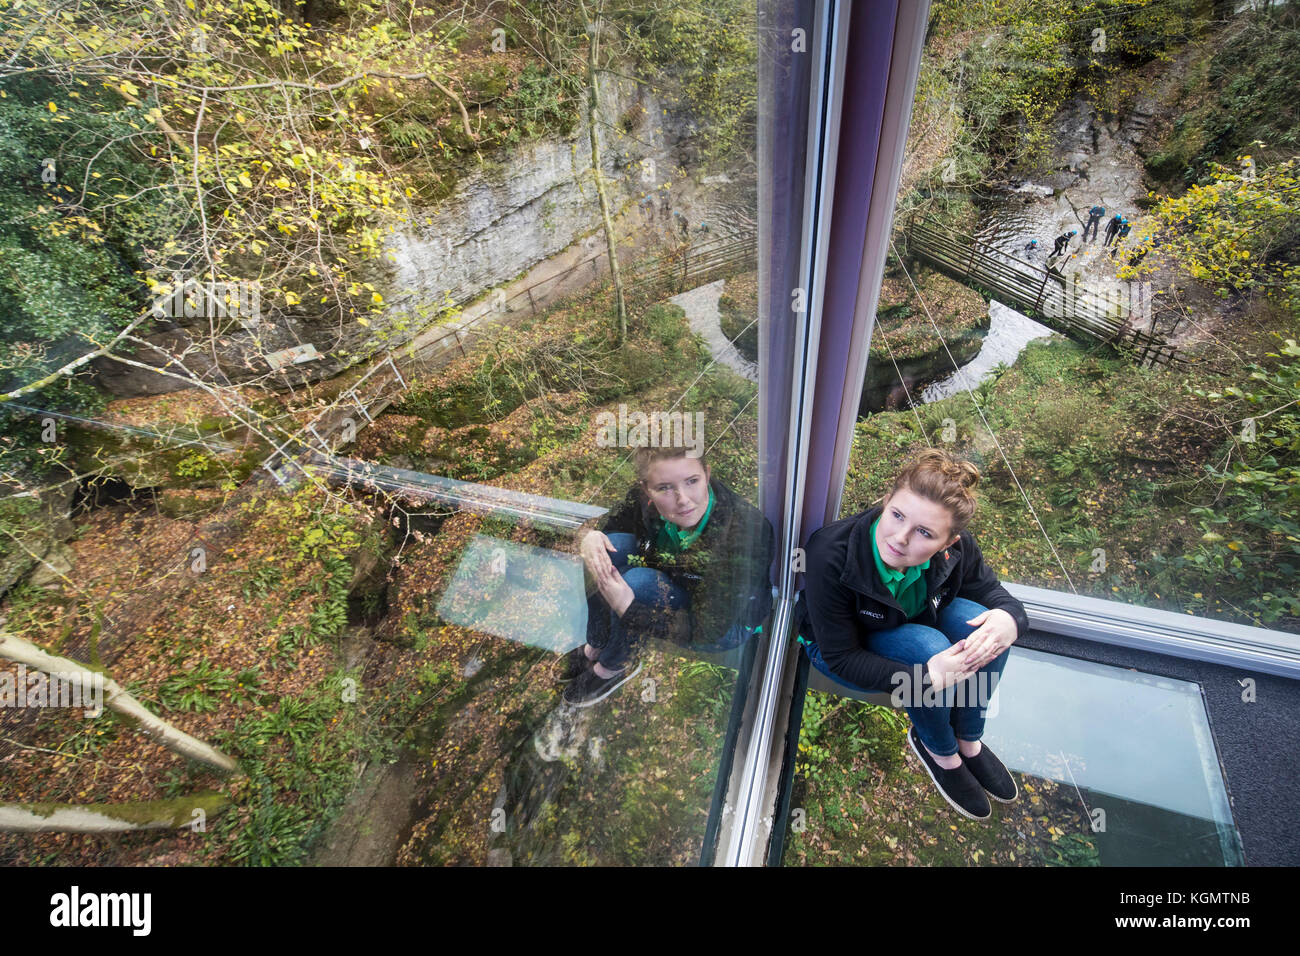 Rebecca Verity sits on the glass floor of a new cantilevered extension over one of Yorkshire's most spectacular natural sights which reaches out over How Stean Gorge, a unique limestone gorge in the Yorkshire Dales, with floor to ceiling glass walls and glass panels in the floor. Stock Photo